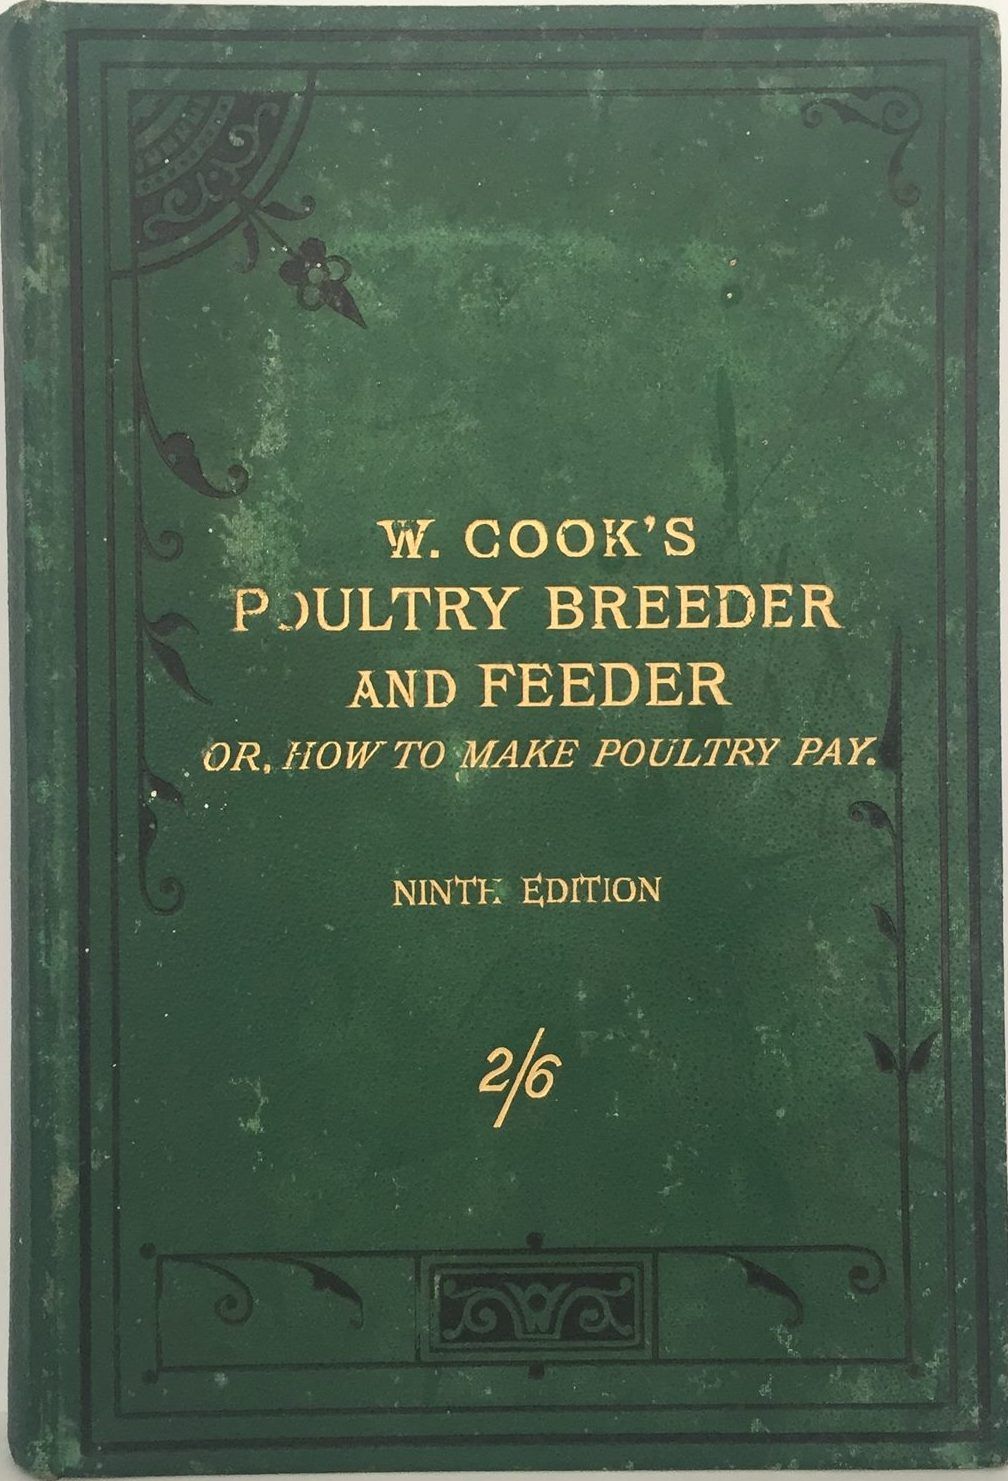 W Cooks Poultry Breeder and Feeder: Or How To Make Poultry Pay